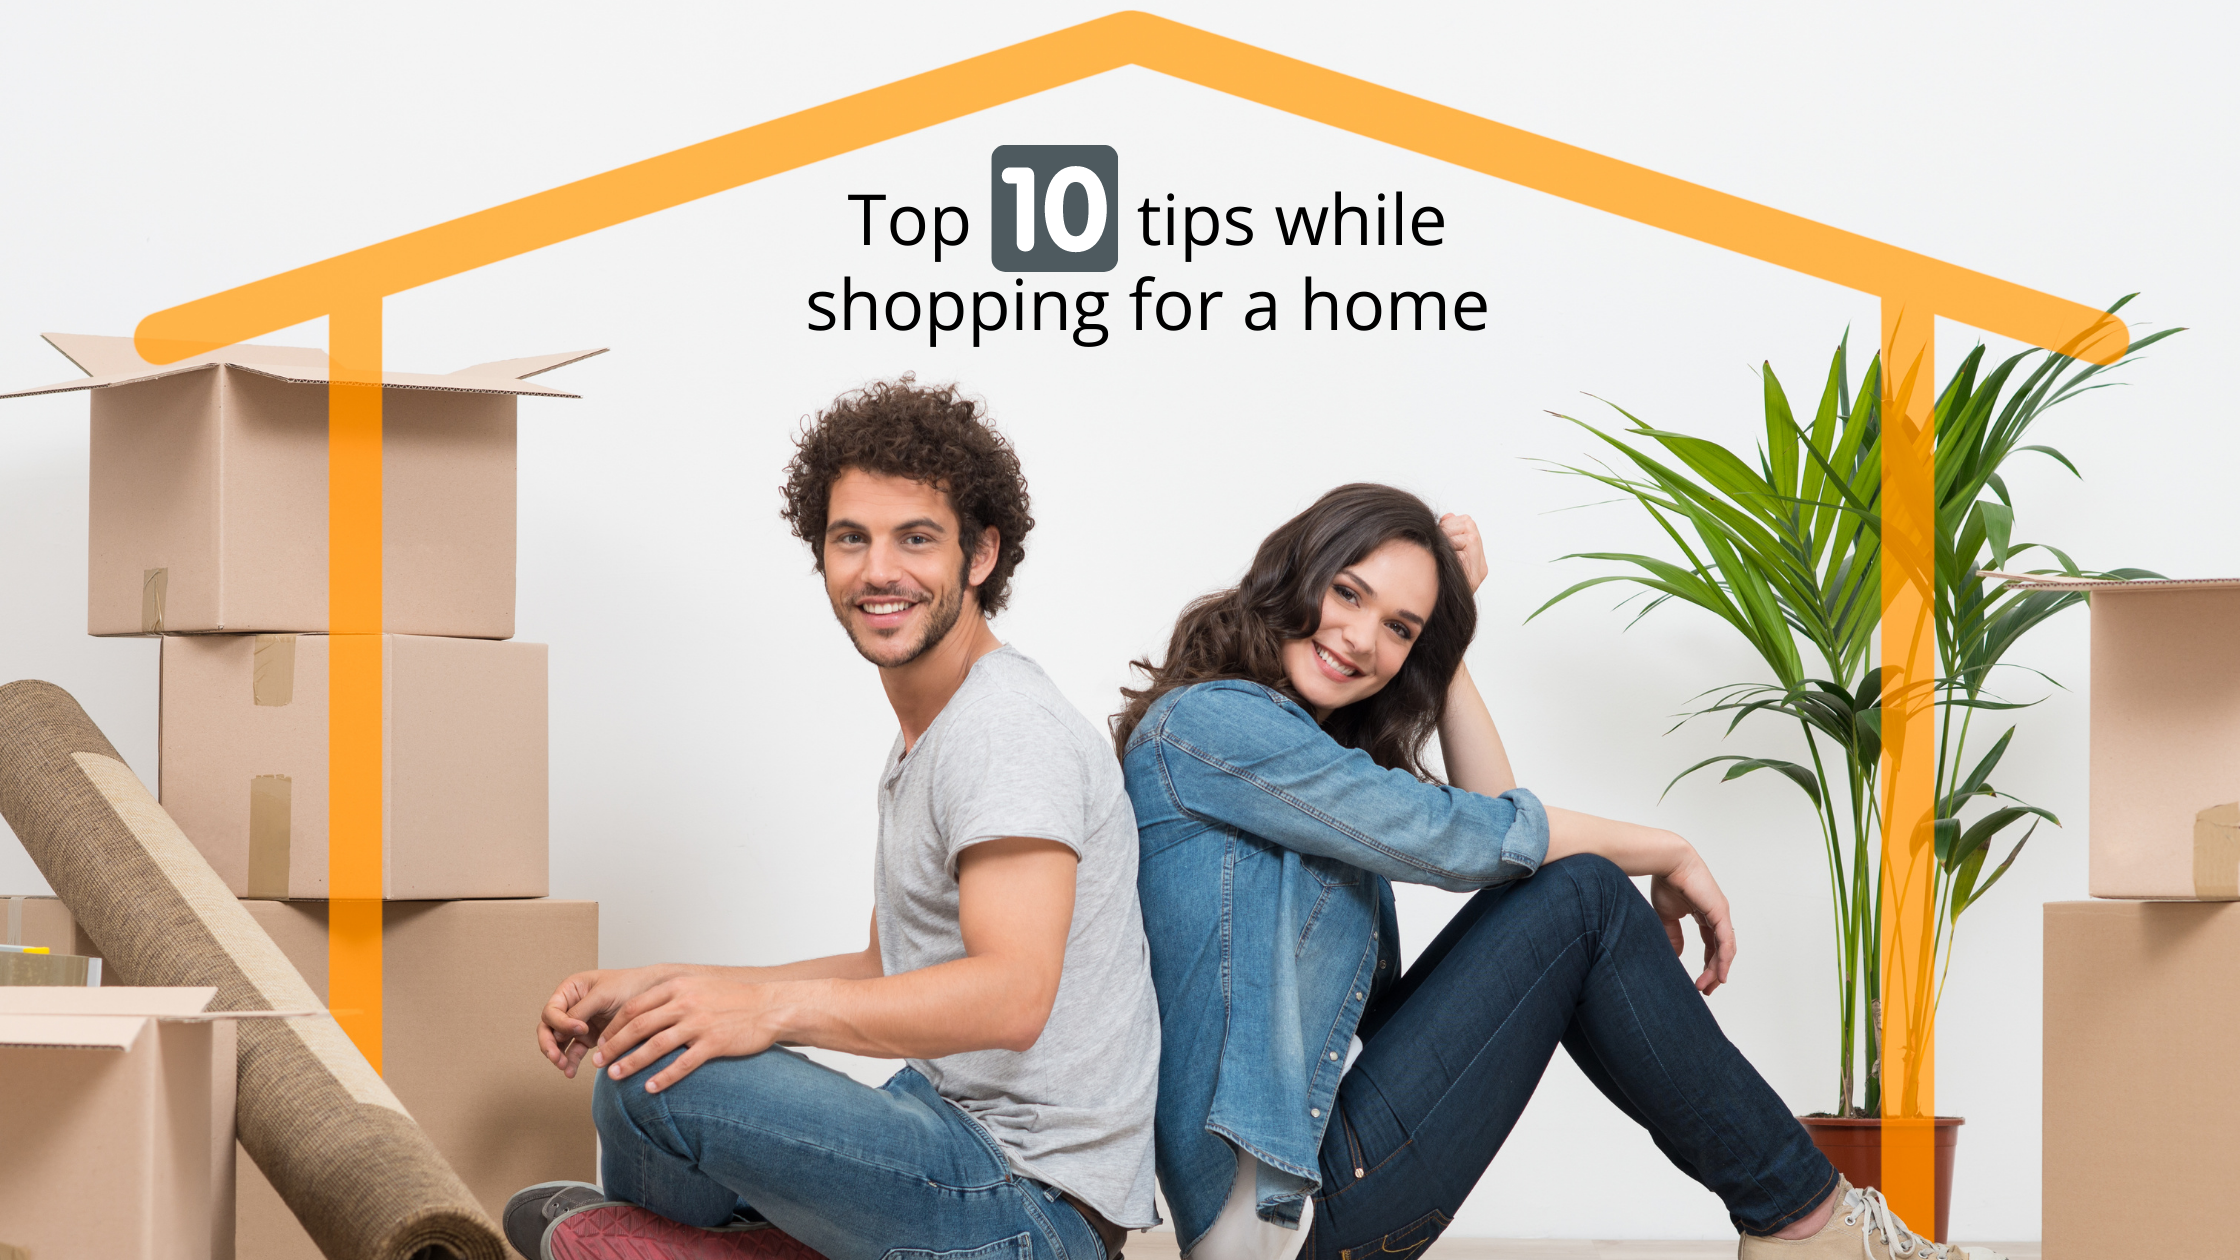 Top 10 tips while shopping for a home